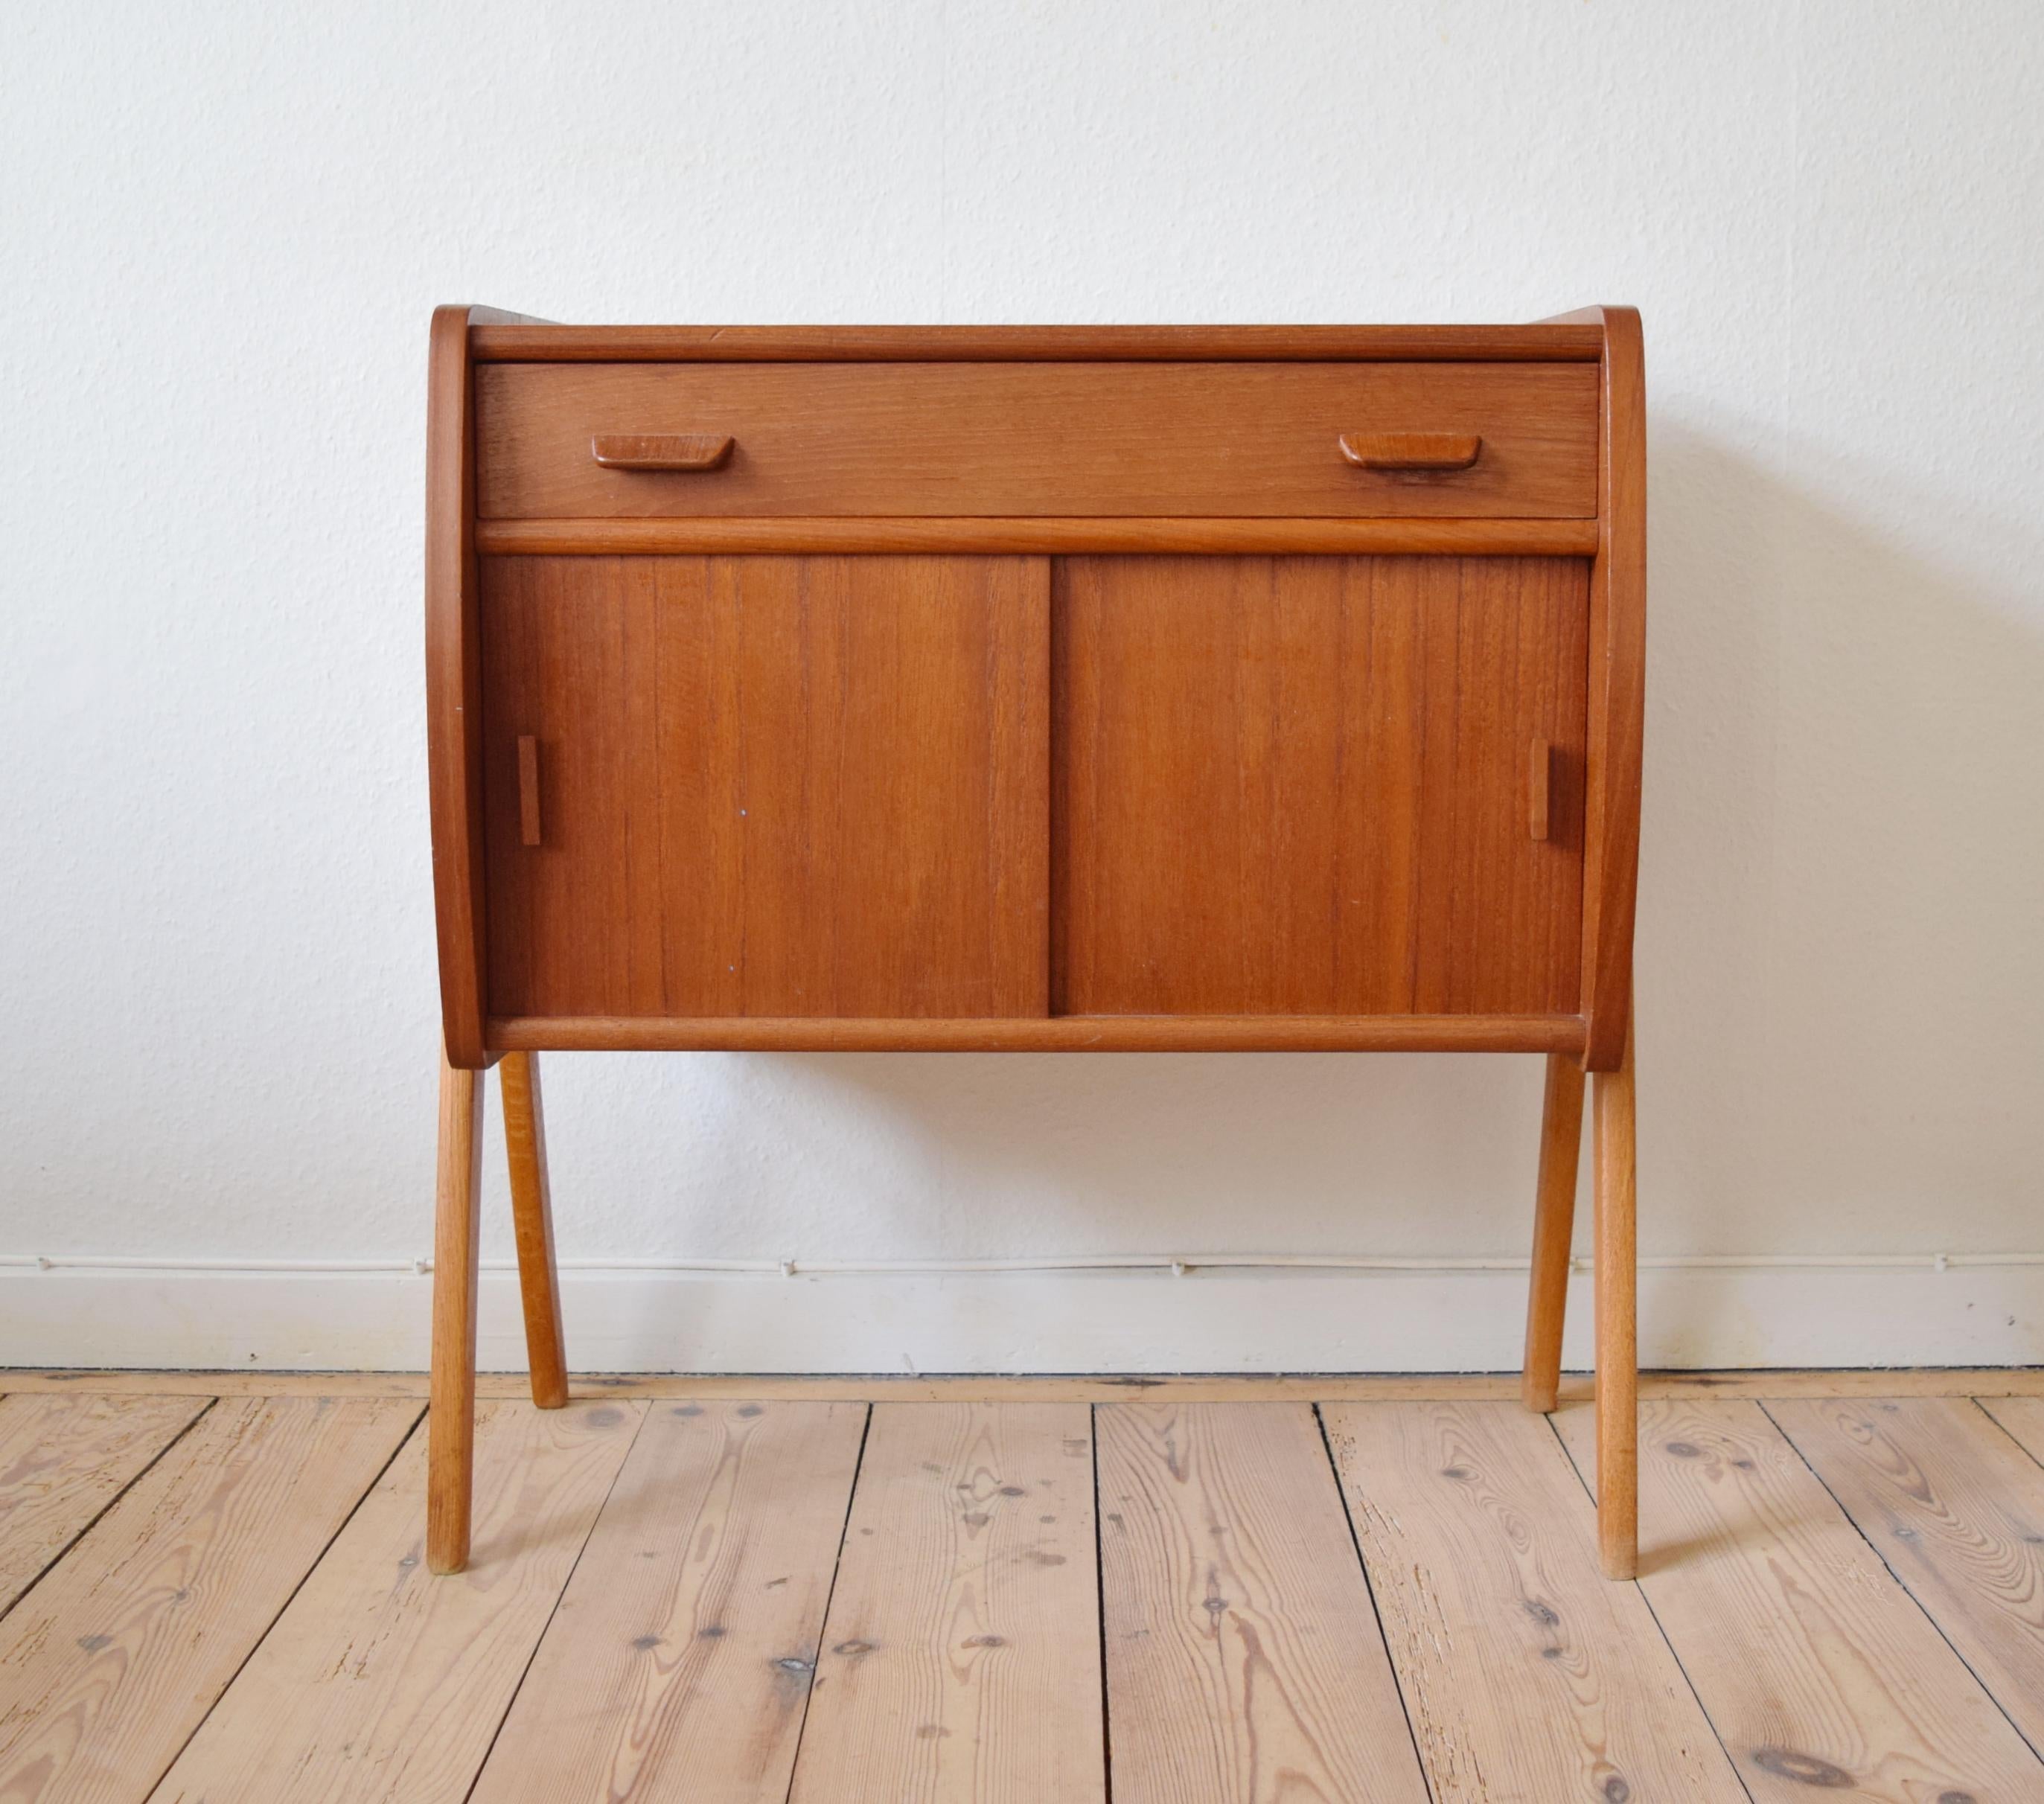 Poul Volther small cabinet with drawer and two sliding doors with maple interior. Sits on 'compass' shaped solid teak legs. Manufactured in Denmark in the 1960s.
Poul M. Volther was a trained cabinetmaker who also attended the School of Arts &